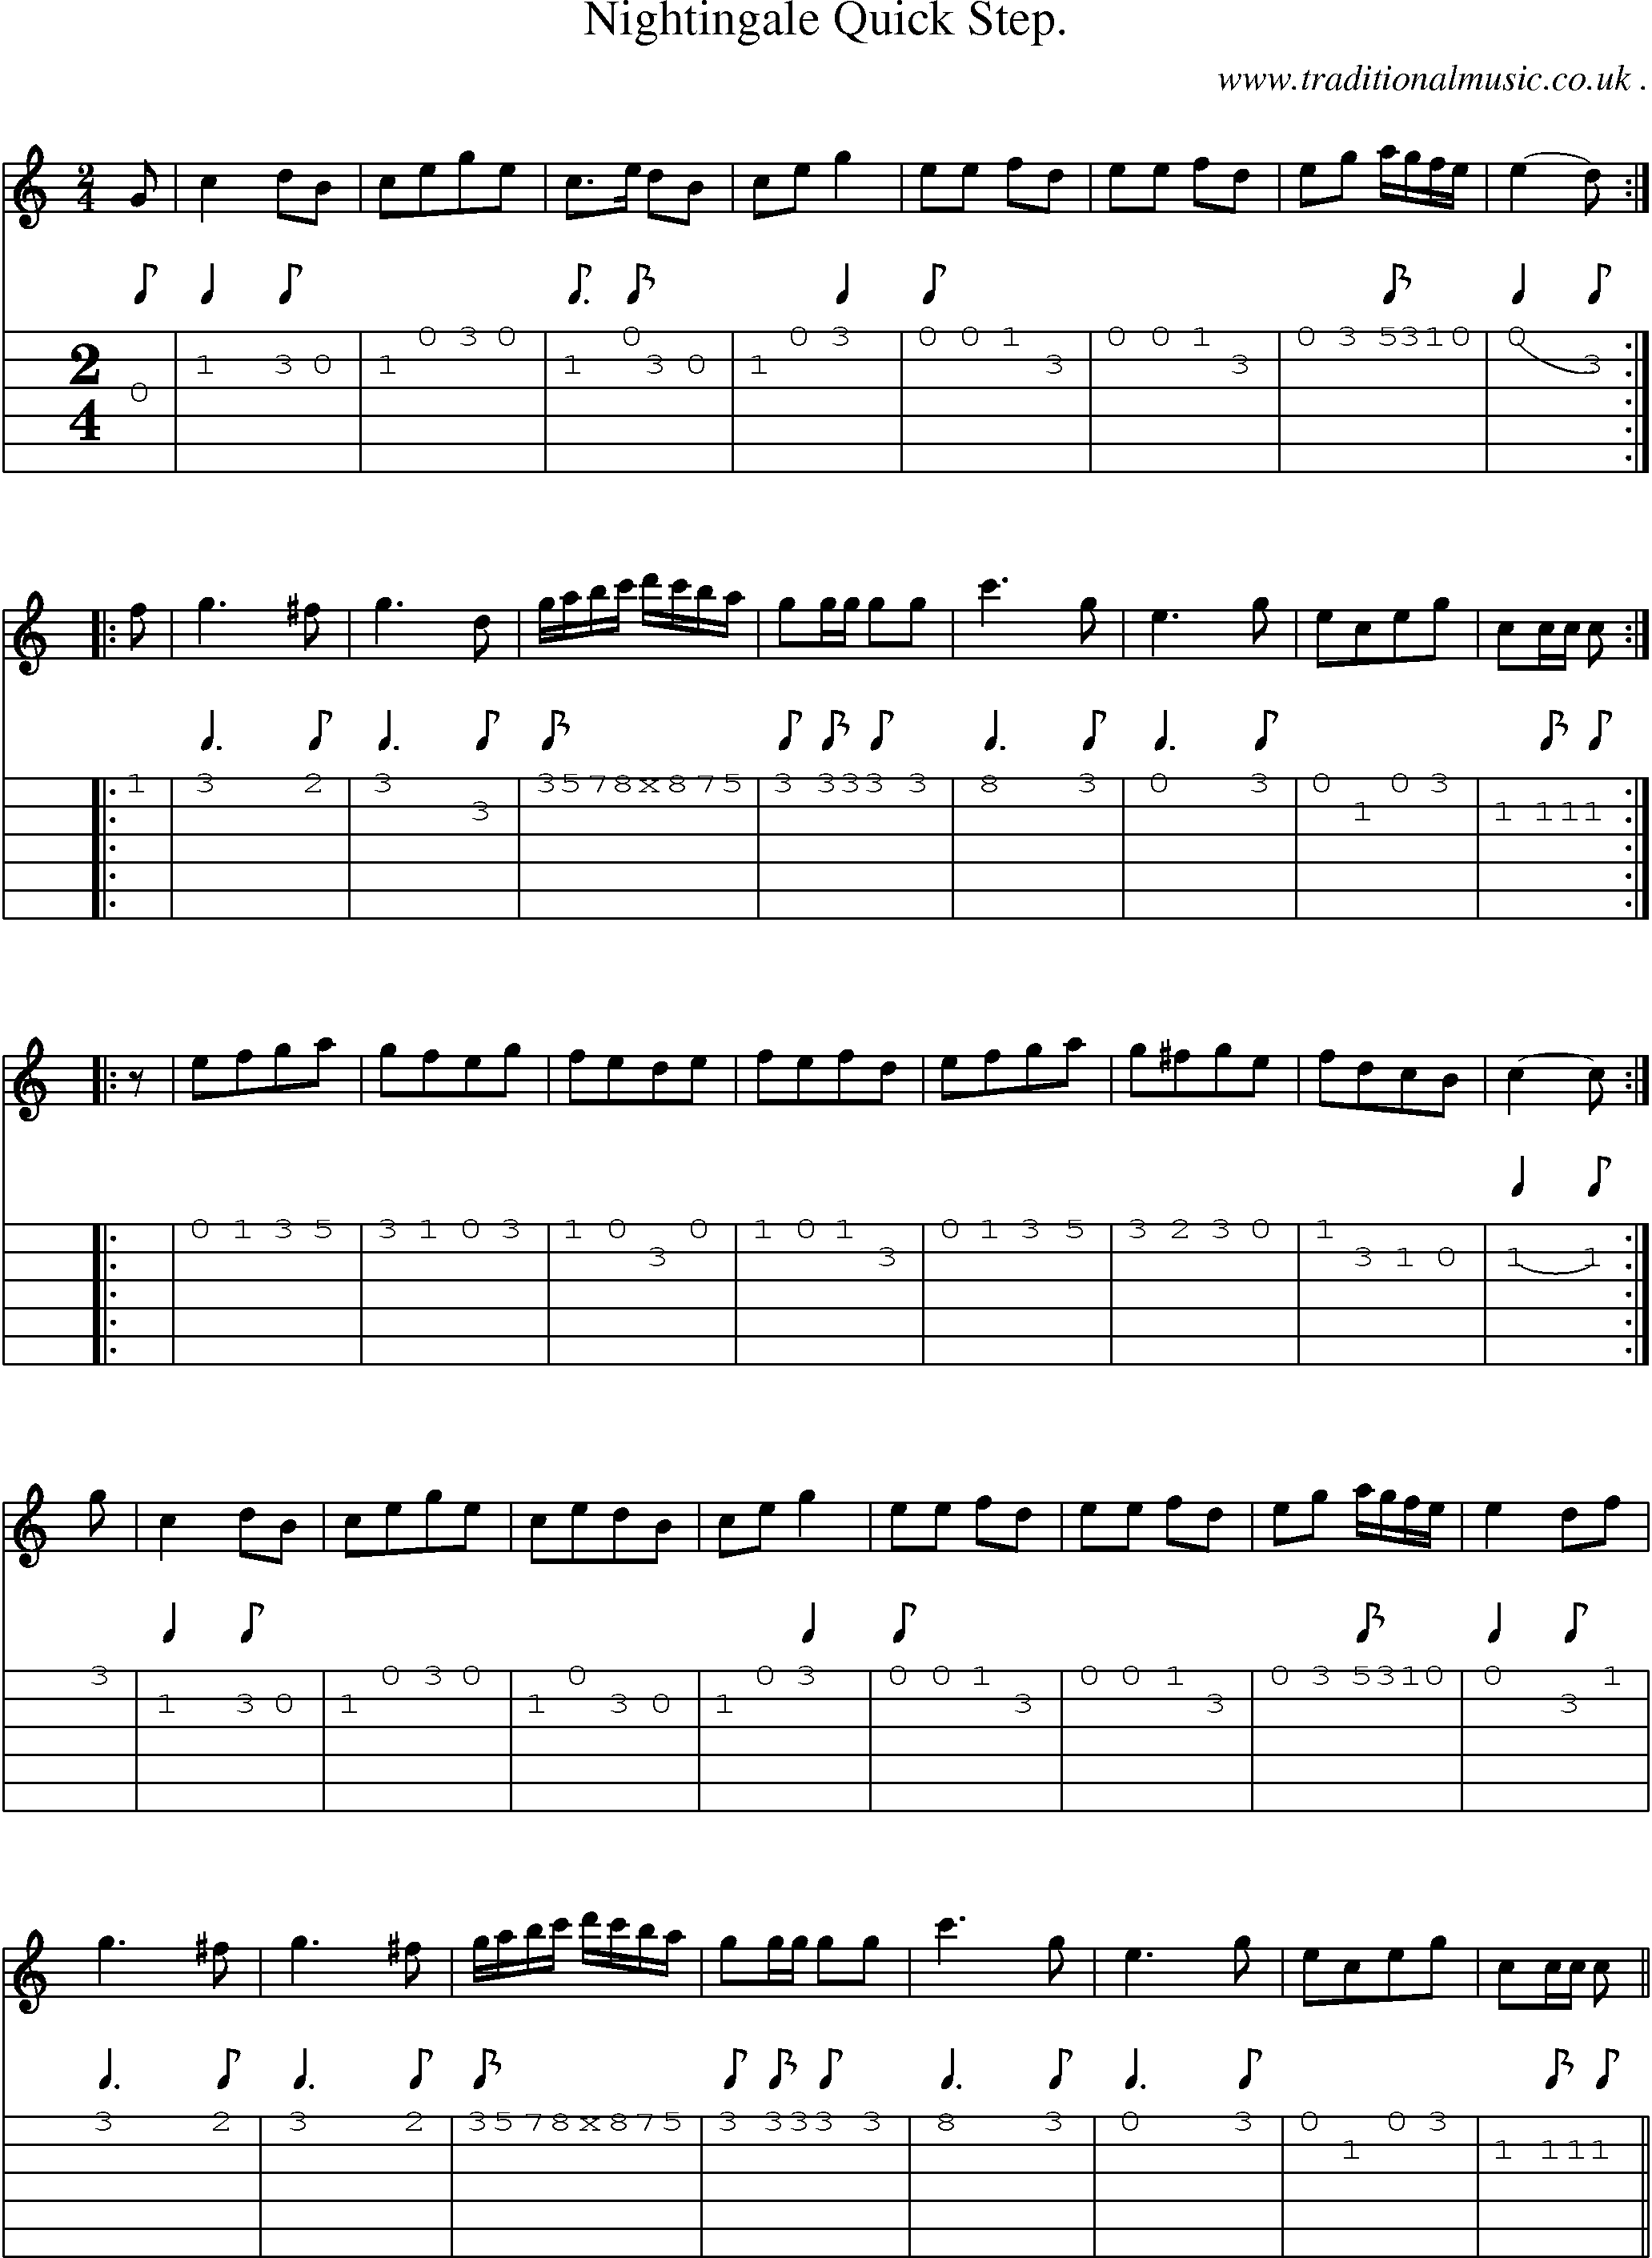 Sheet-Music and Guitar Tabs for Nightingale Quick Step